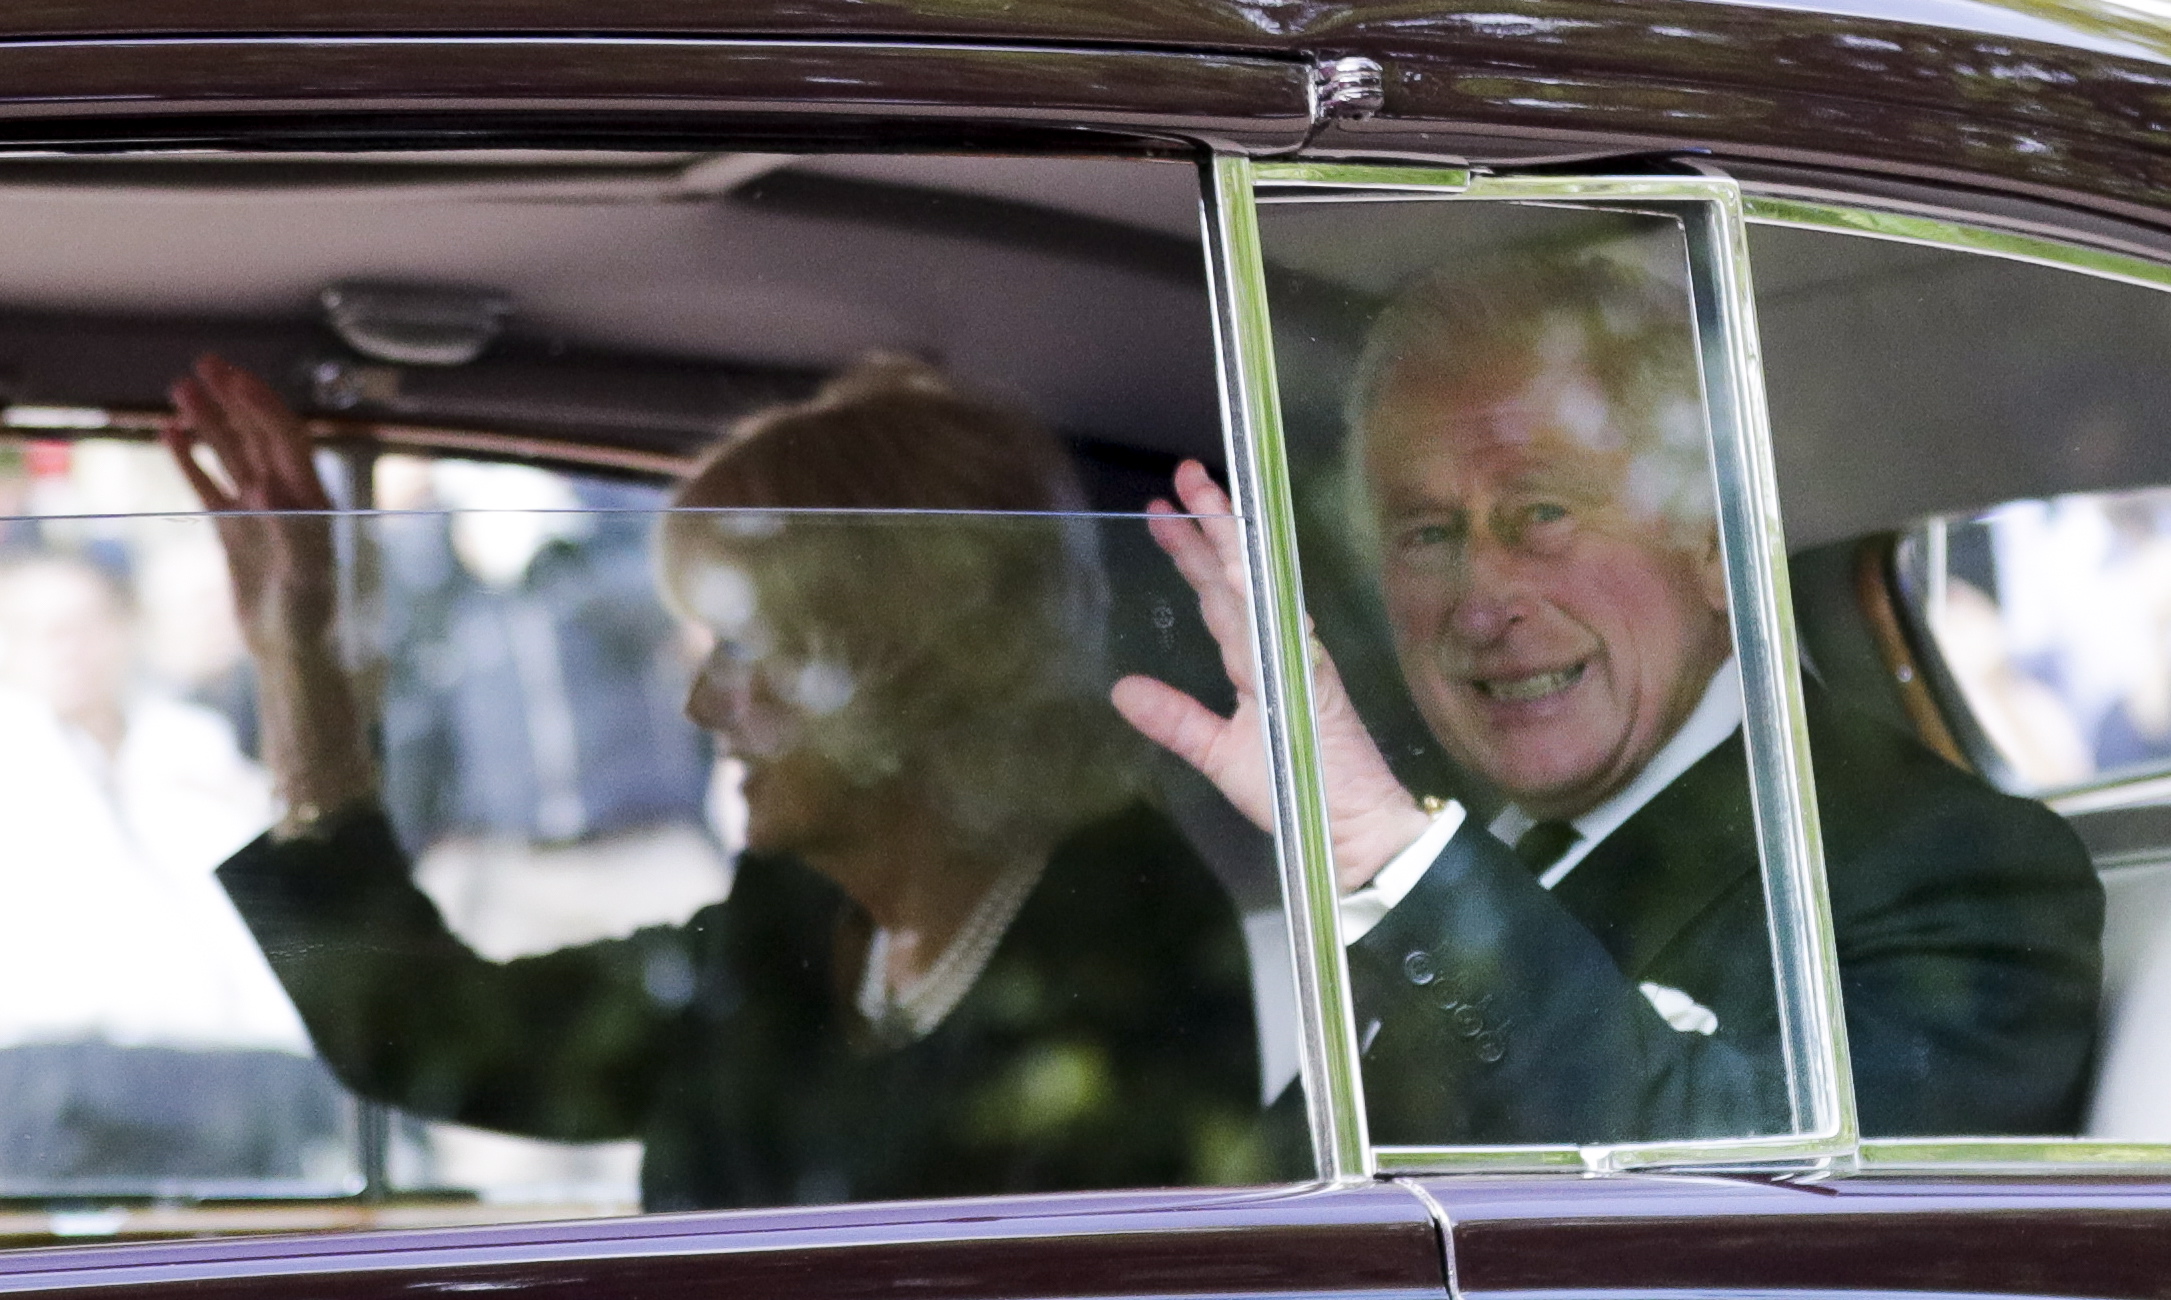 epa10179455 Britain's King Charles III and Camilla, the Queen Consort, gesture as they are driven on the way to Westminster, in London, Britain, 12 September 2022. King Charles III will address Parliament for the first time as monarch on 12 September. King Charles III was announced as the new sovereign during a meeting of the Accession Council on 10 September following the death of Britain's Queen Elizabeth II at her Scottish estate on 08 September.  EPA/OLIVIER HOSLET